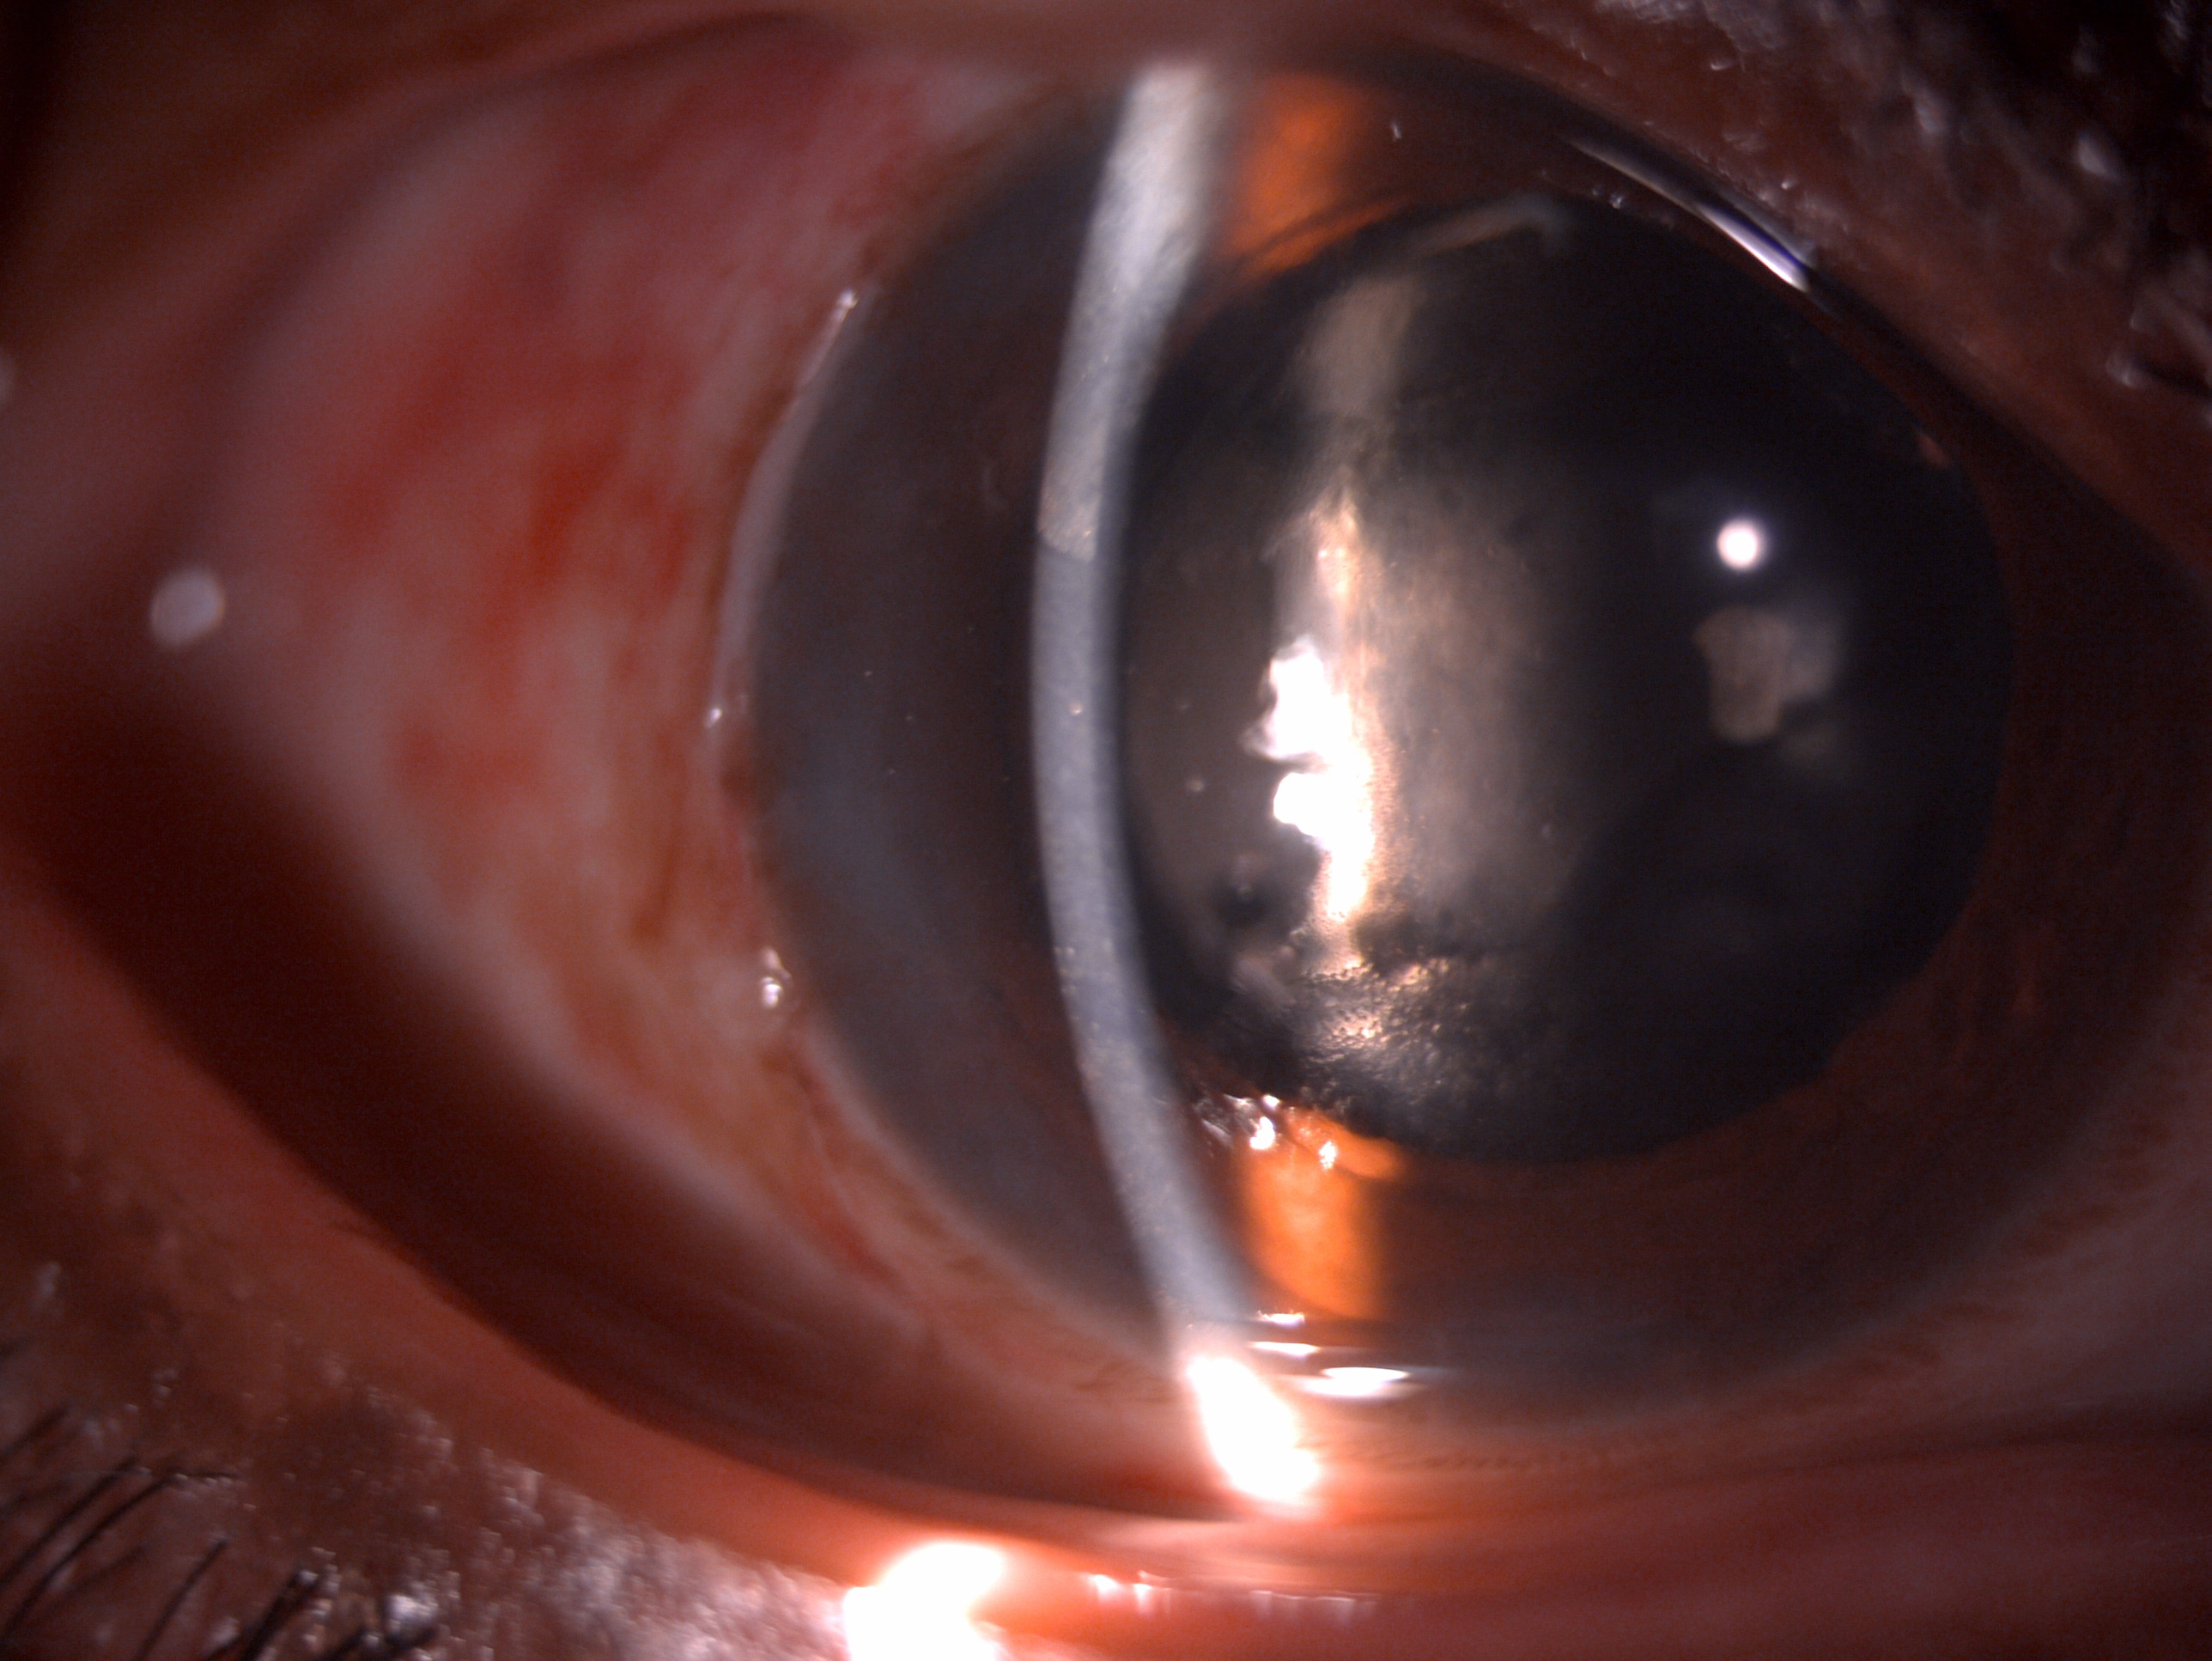 Postoperative day 1 slit lamp image of the patient after undergoing phacoemulsification with central 2+ striate keratopathy